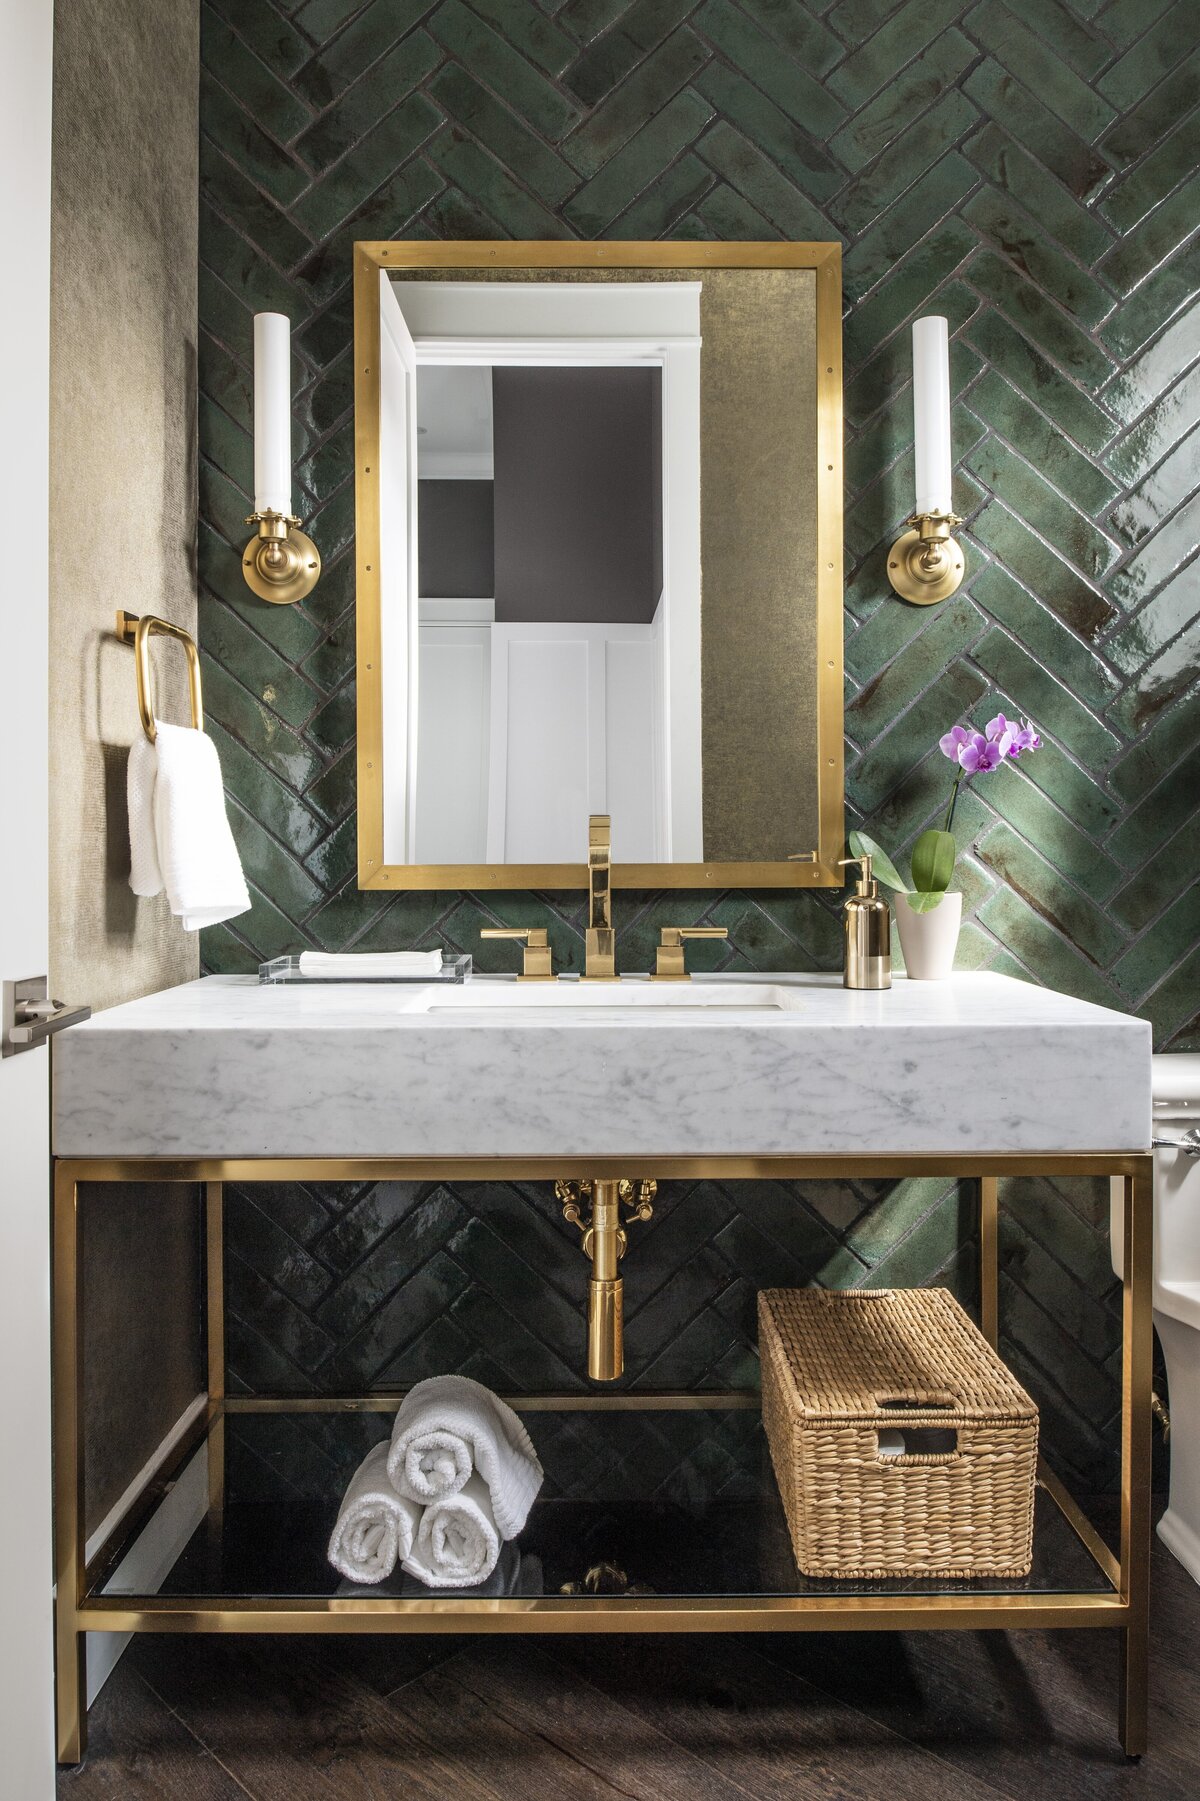 Green Tiled Powder Bath + White Counter and Golden Faucet